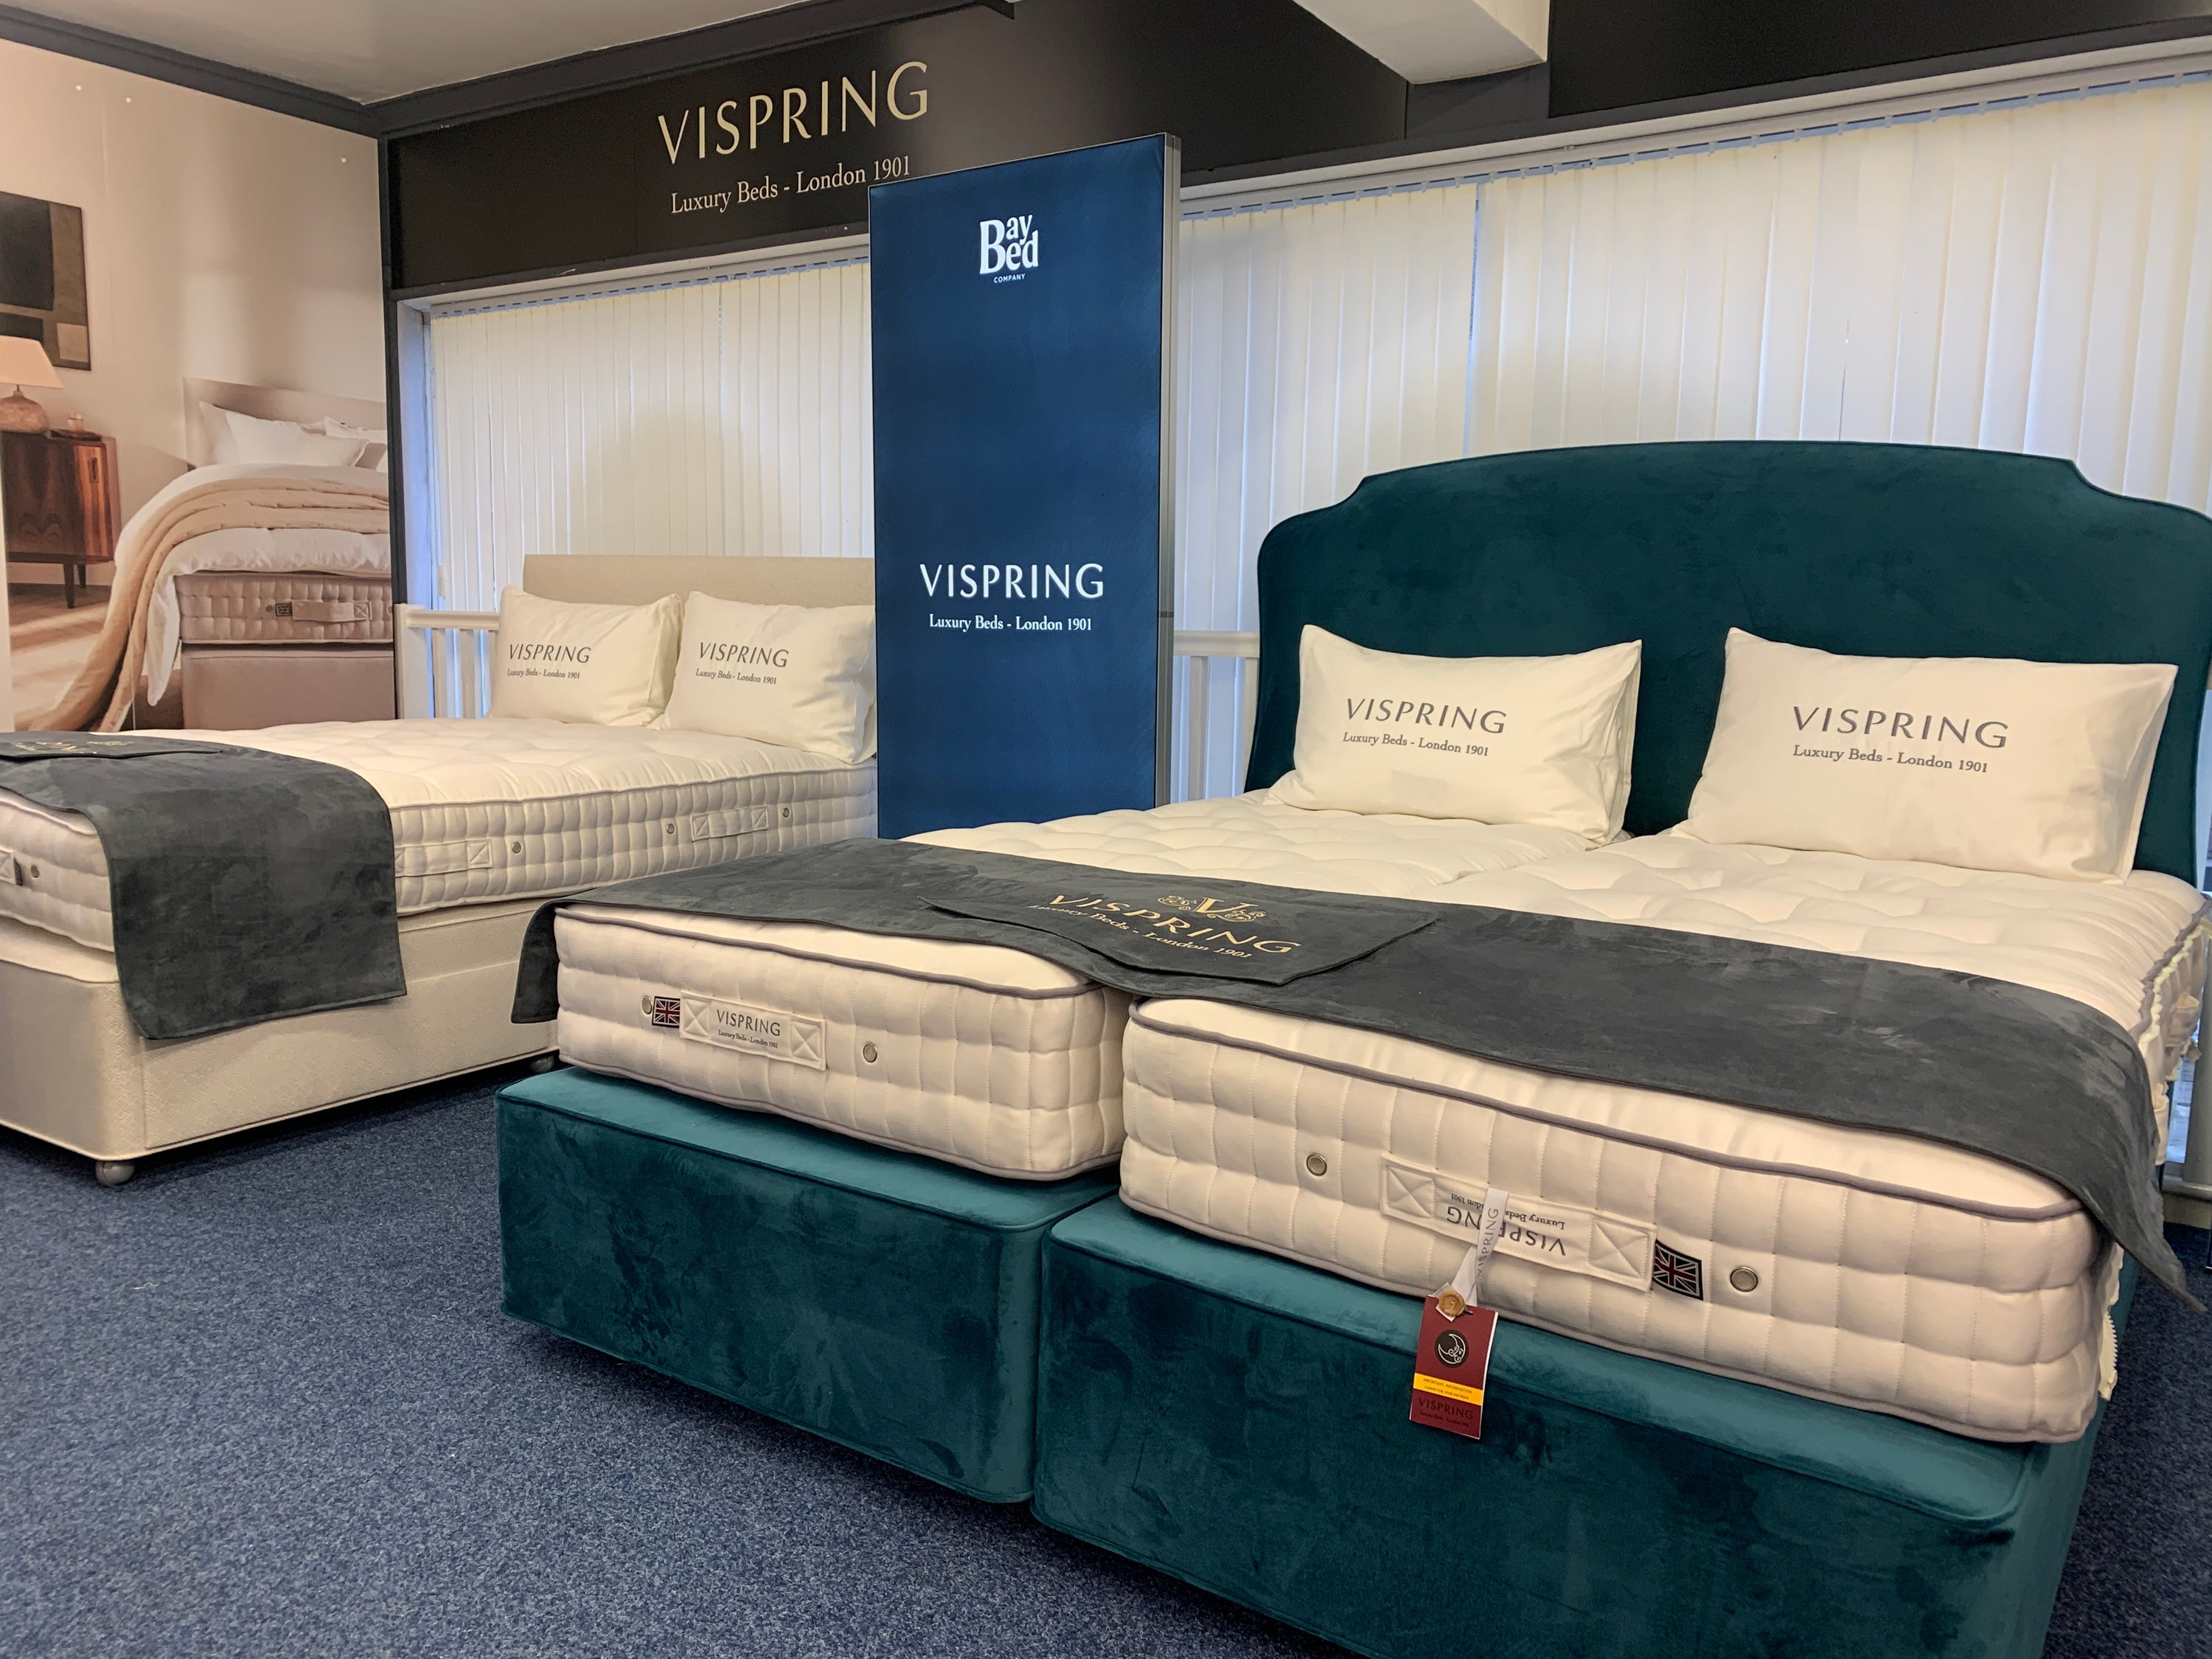 VI Spring beds and mattresses in our Morecambe bed shop